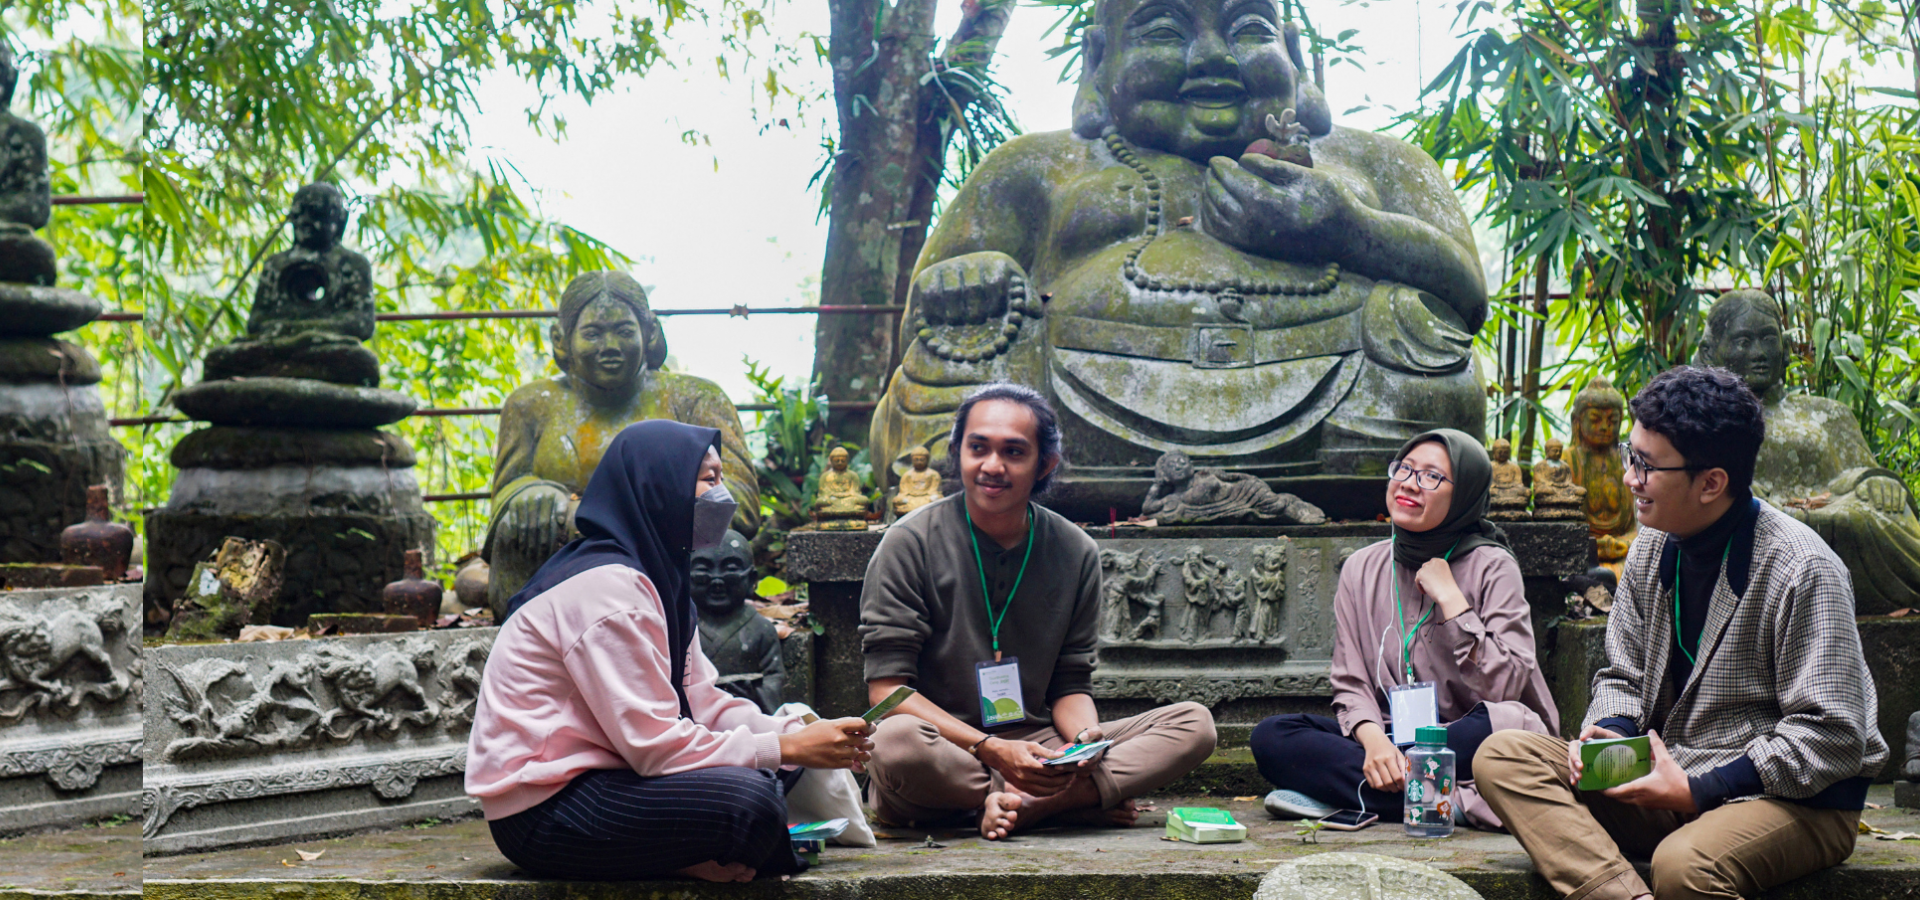 Four Indonesian youth sit in front of a stone statue surrounded by lush greenery, talking